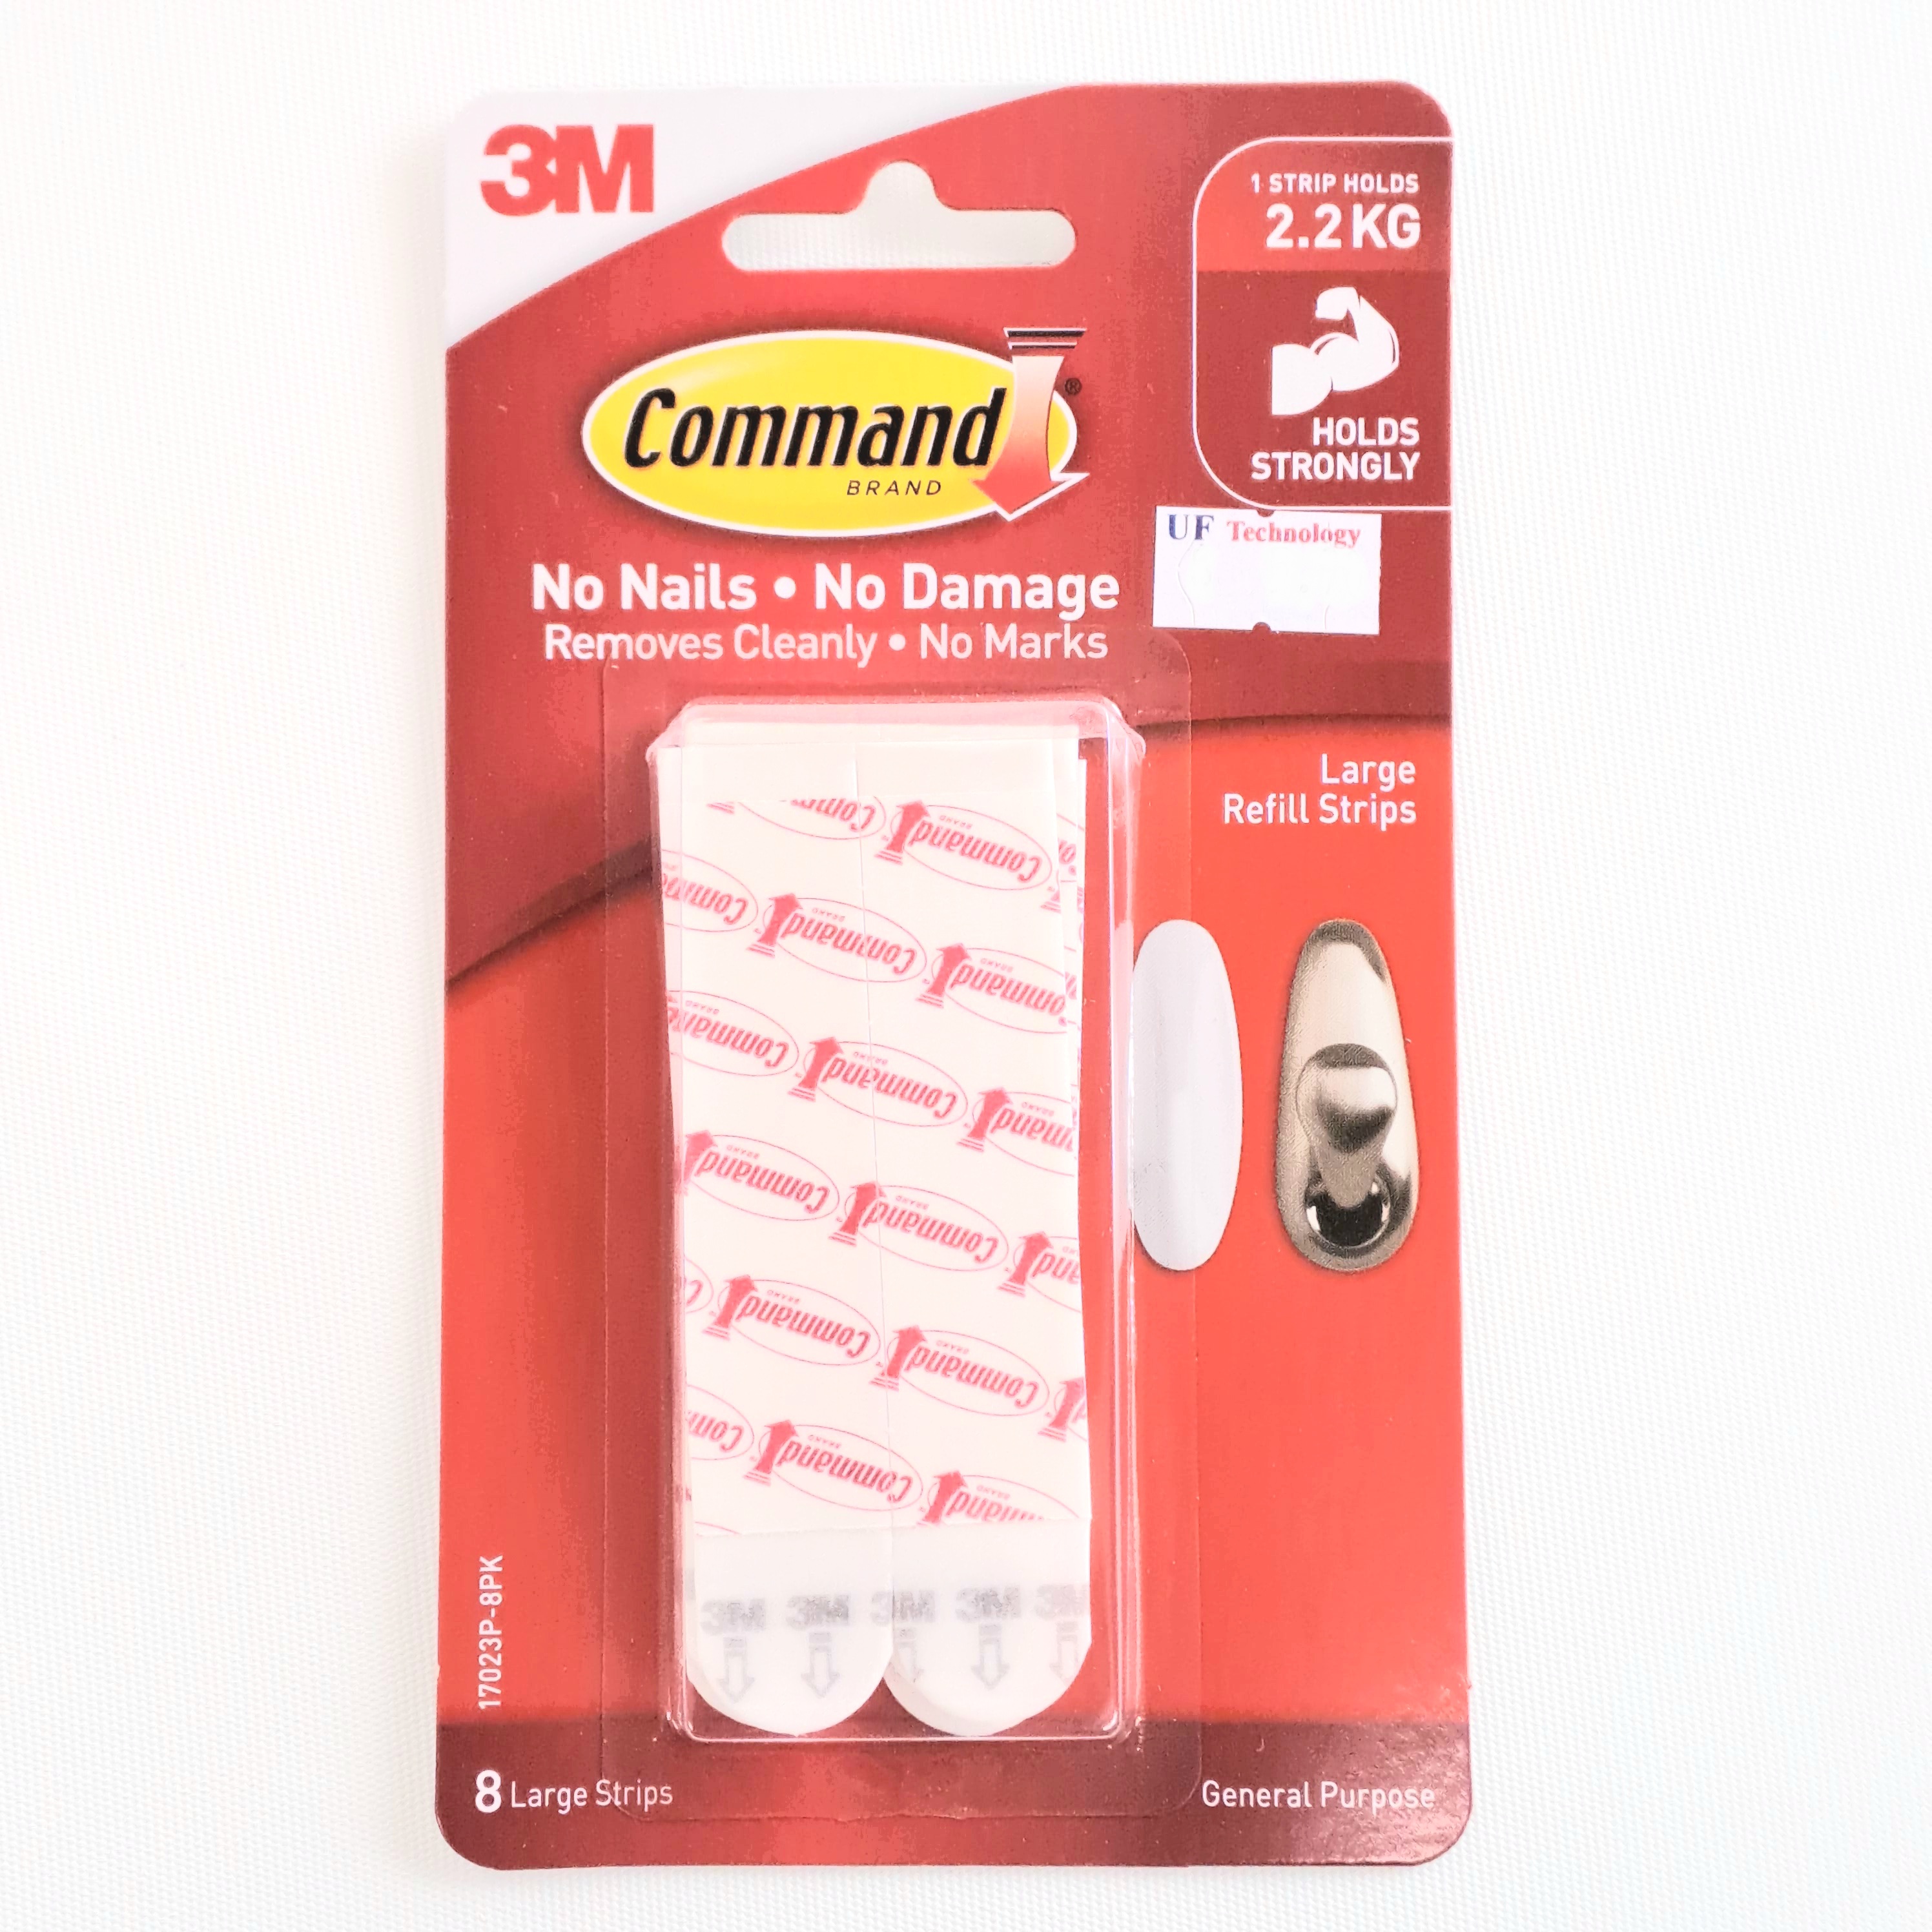 3M Command Large Refill Strips 8 Strips